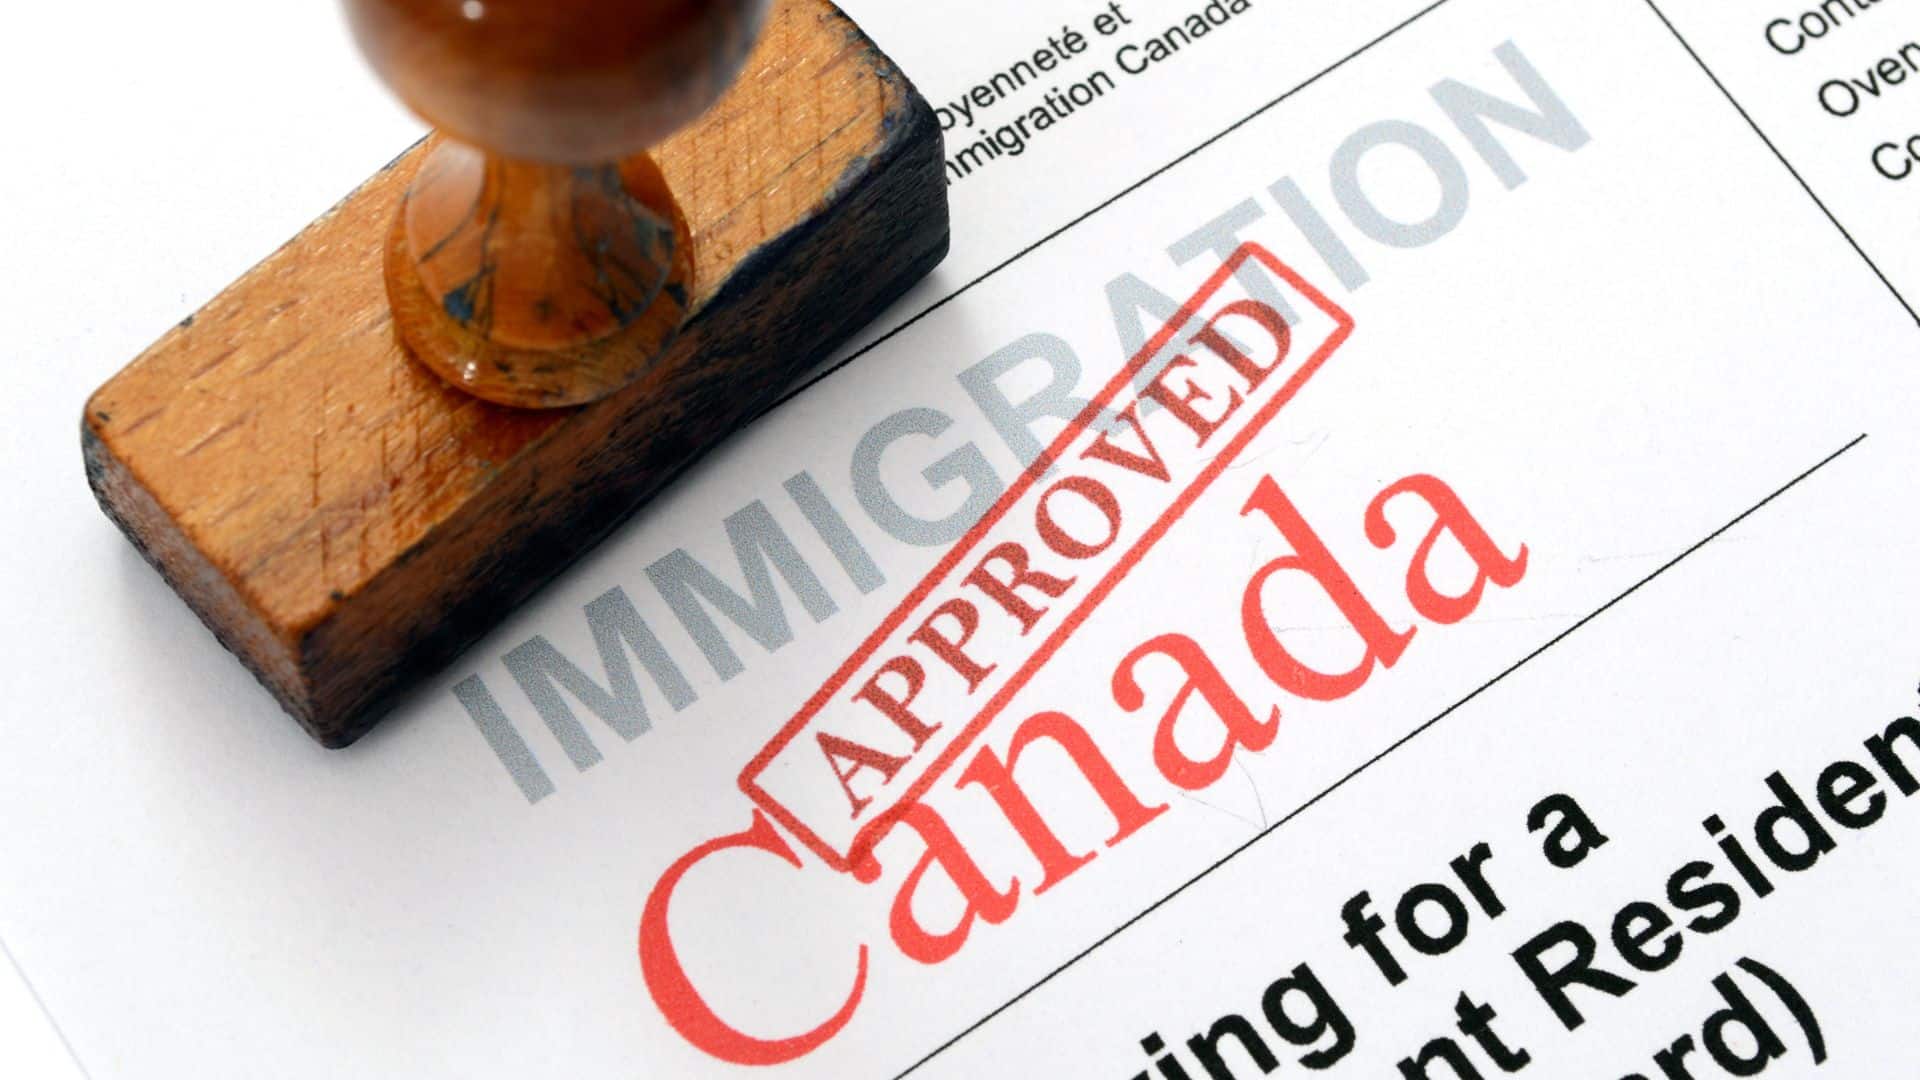 Approved Canadian immigration